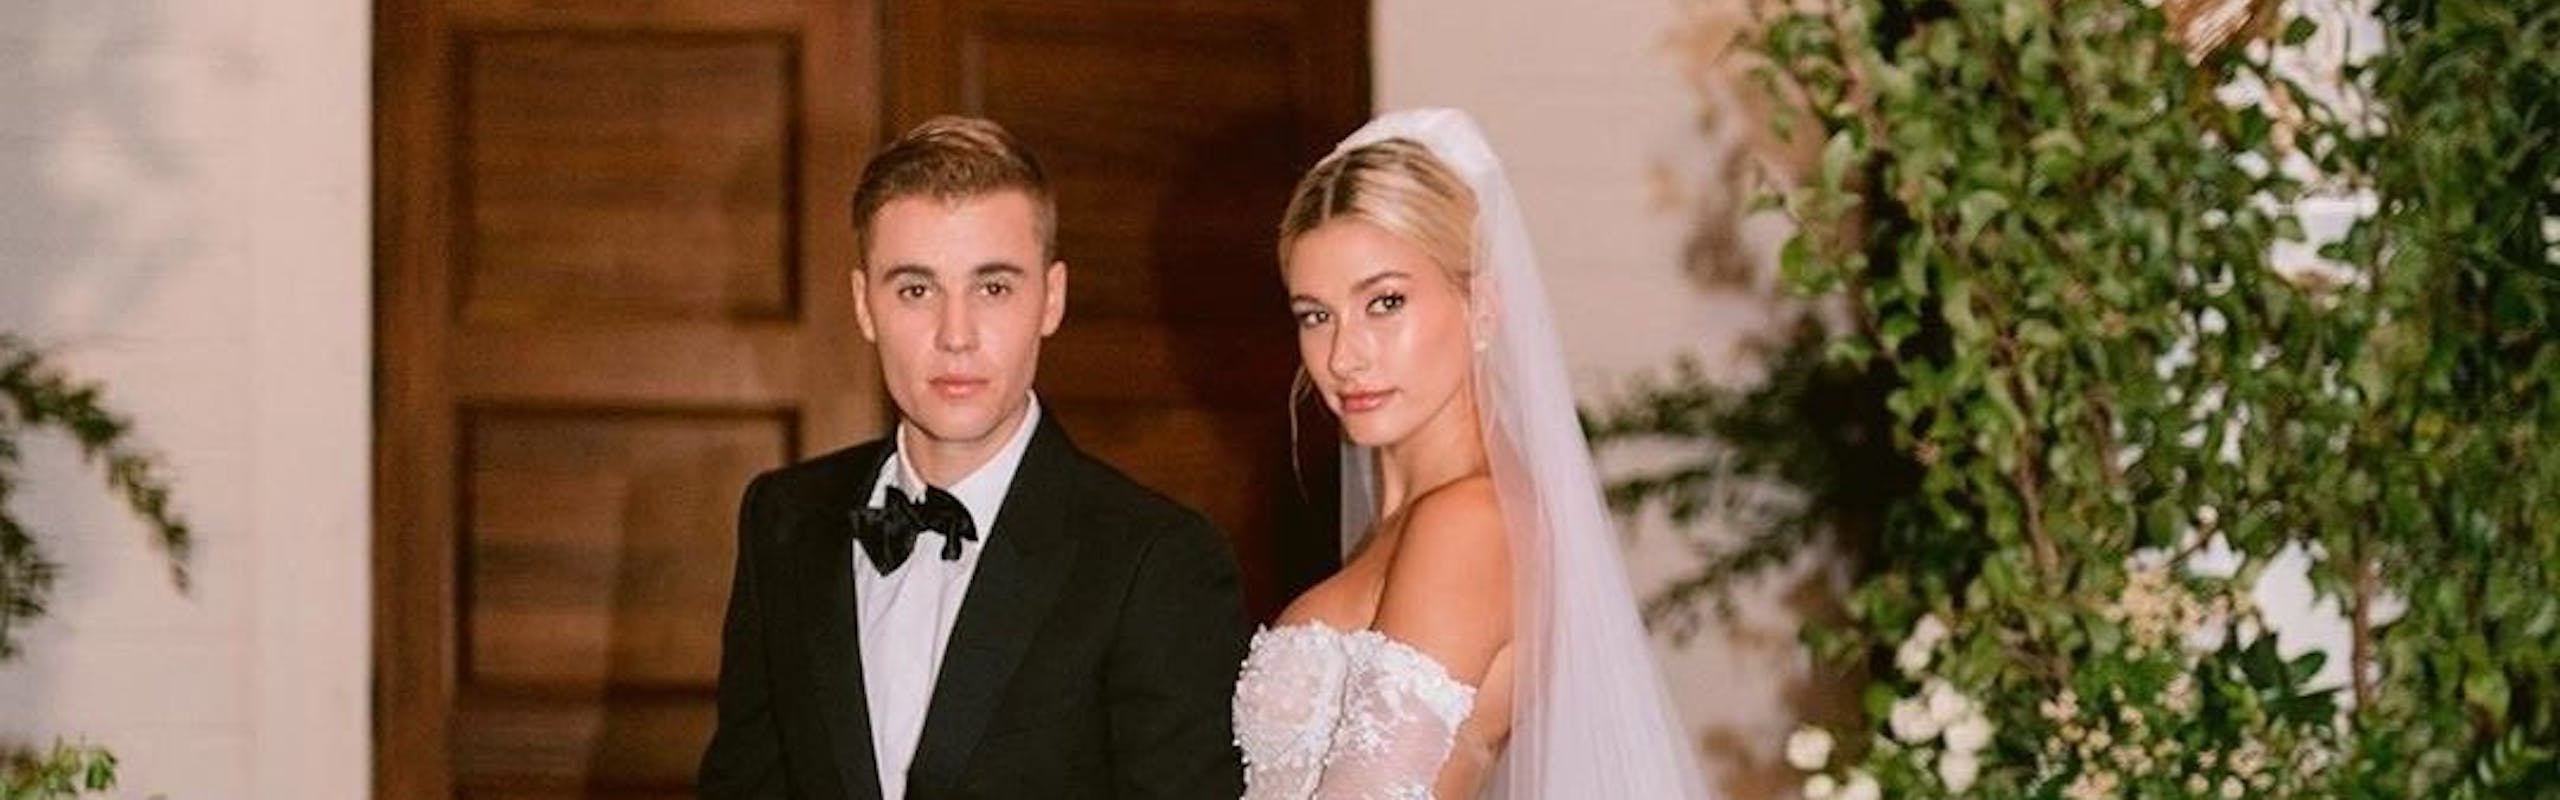 Justin and Hailey Bieber on their wedding day, with Justin wearing a tuxedo and Hailey wearing a white embroidered wedding gown on brick steps